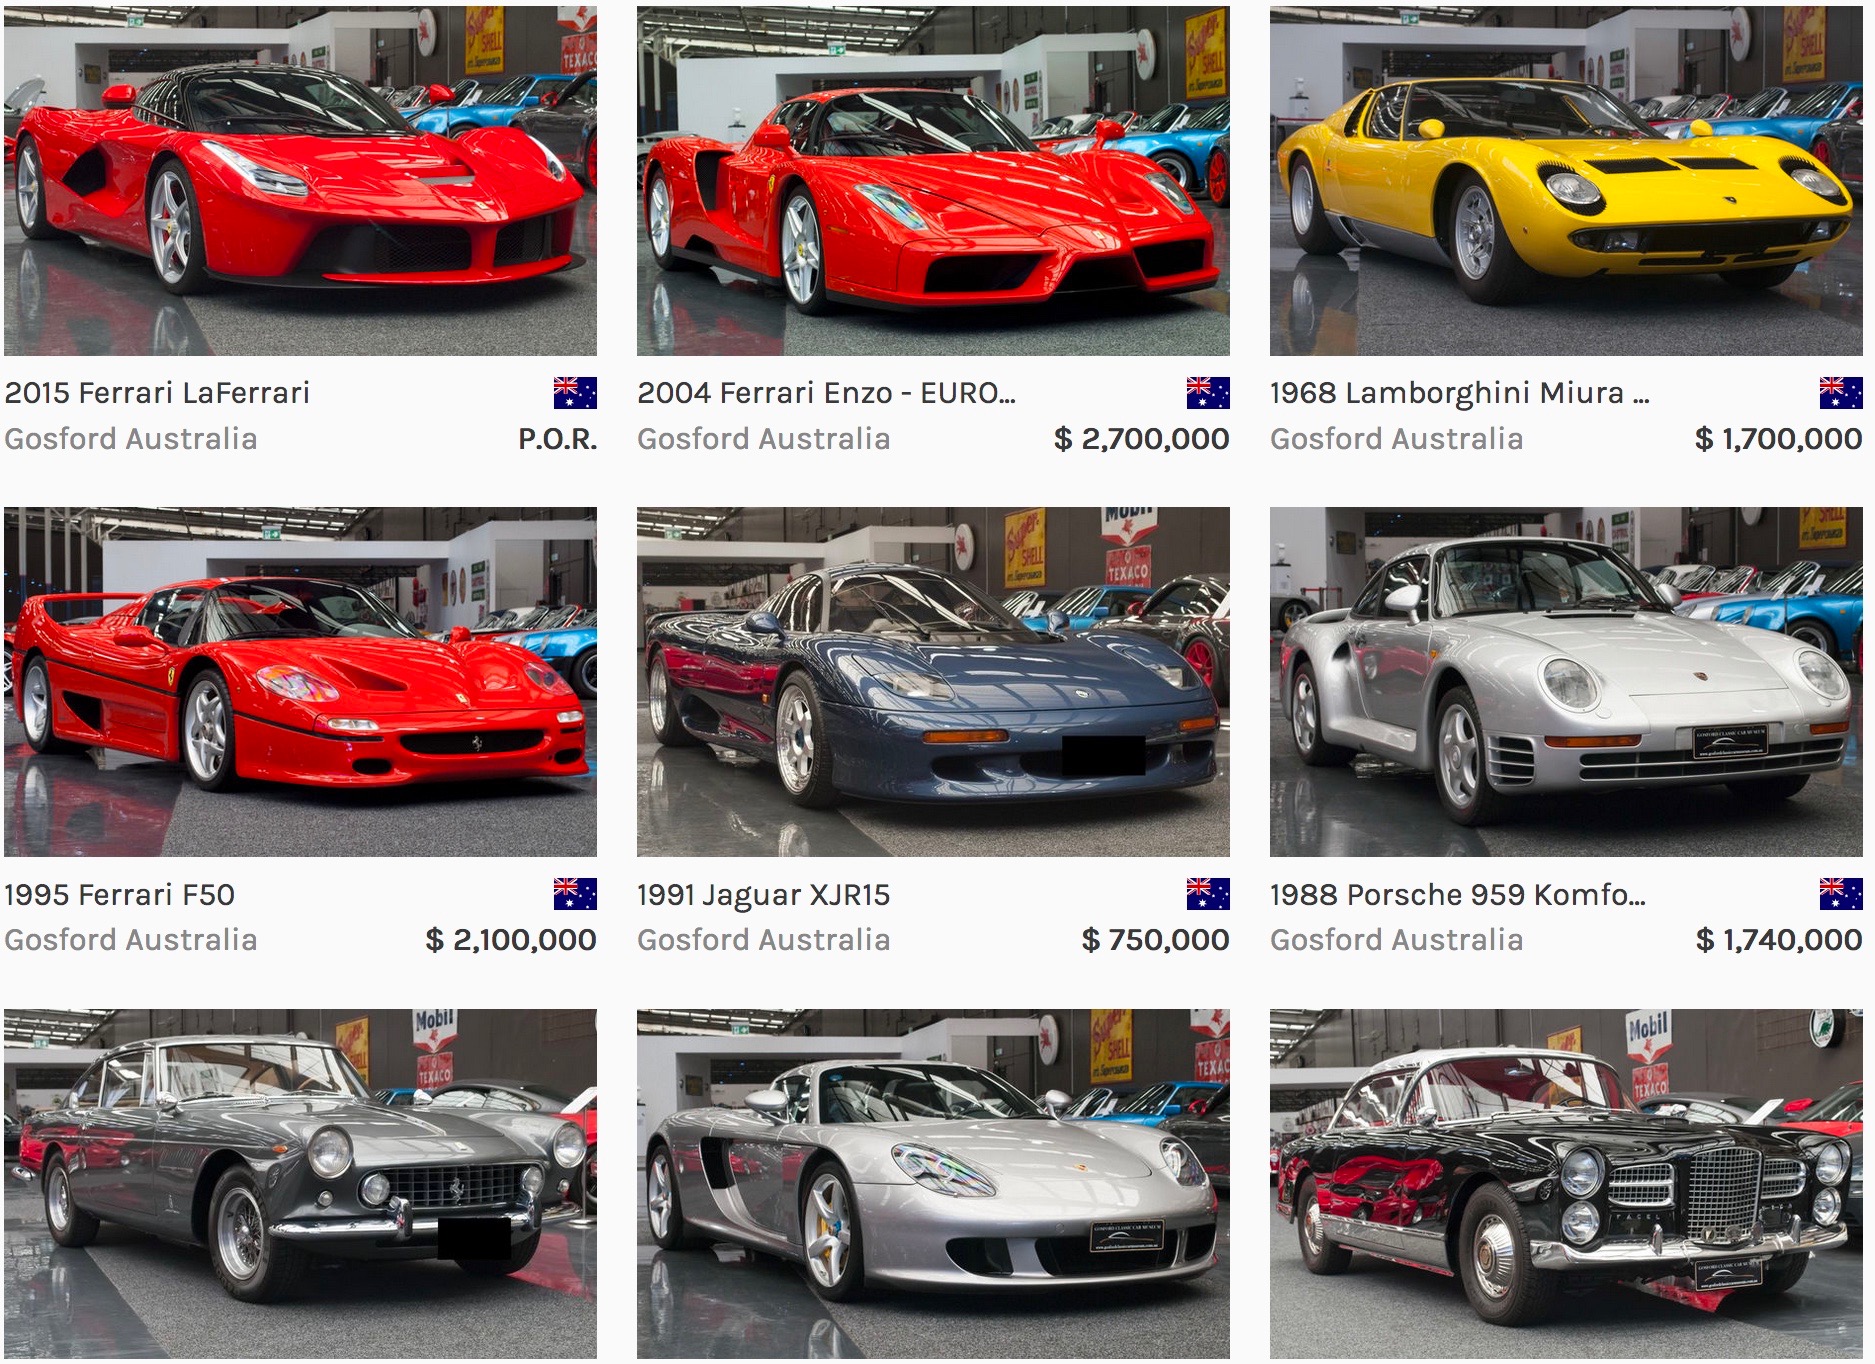 Gosford Museum selling ultra-exclusive supercars, including the only LaFerrari in Australia?